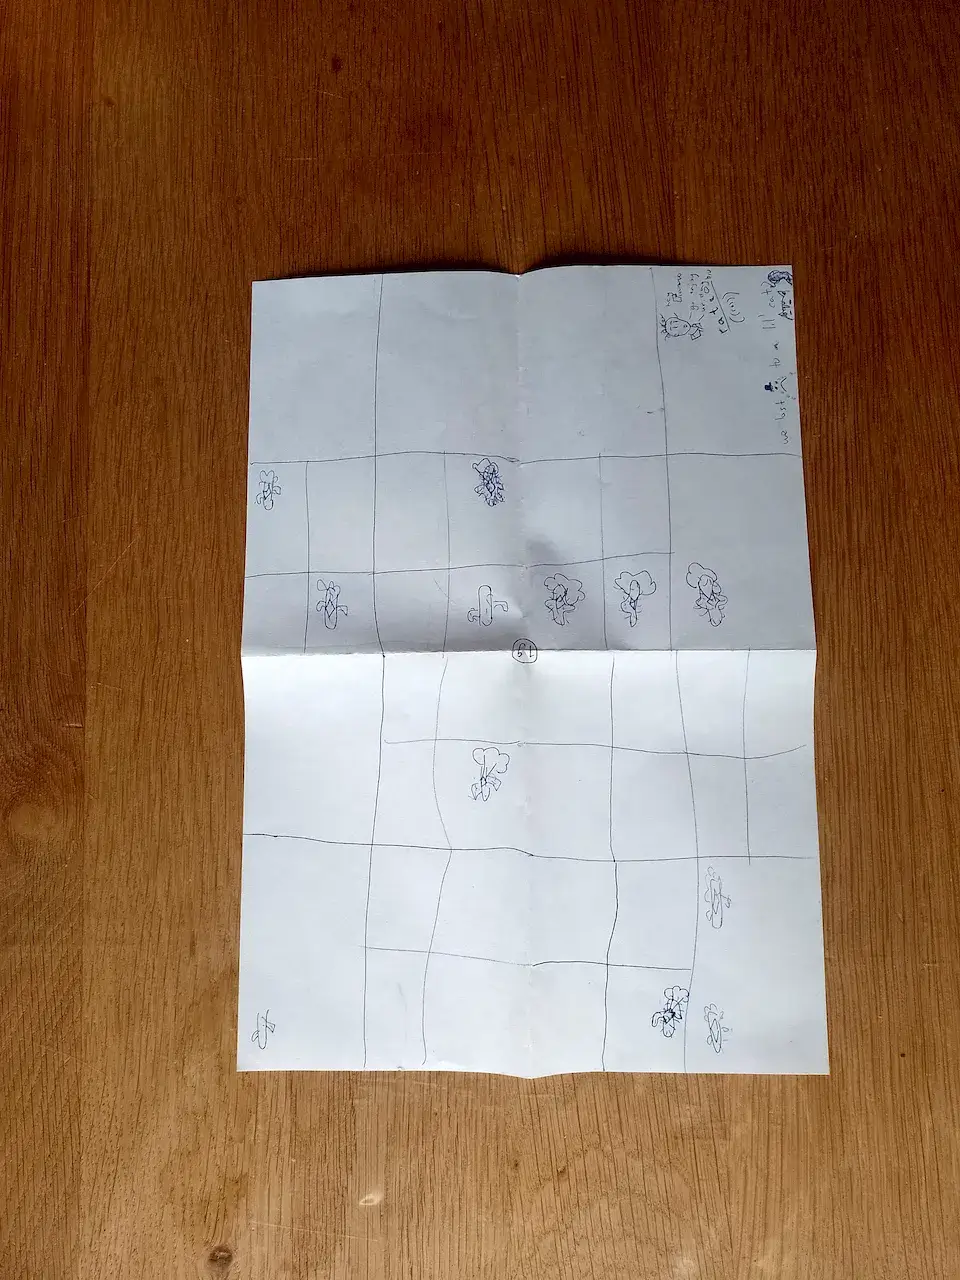 This is one test game. Over time, you explore more of the board ( = subdivide it), and write down clues (broken trees, footprints, etcetera) about where the cryptid was or what photographs said.